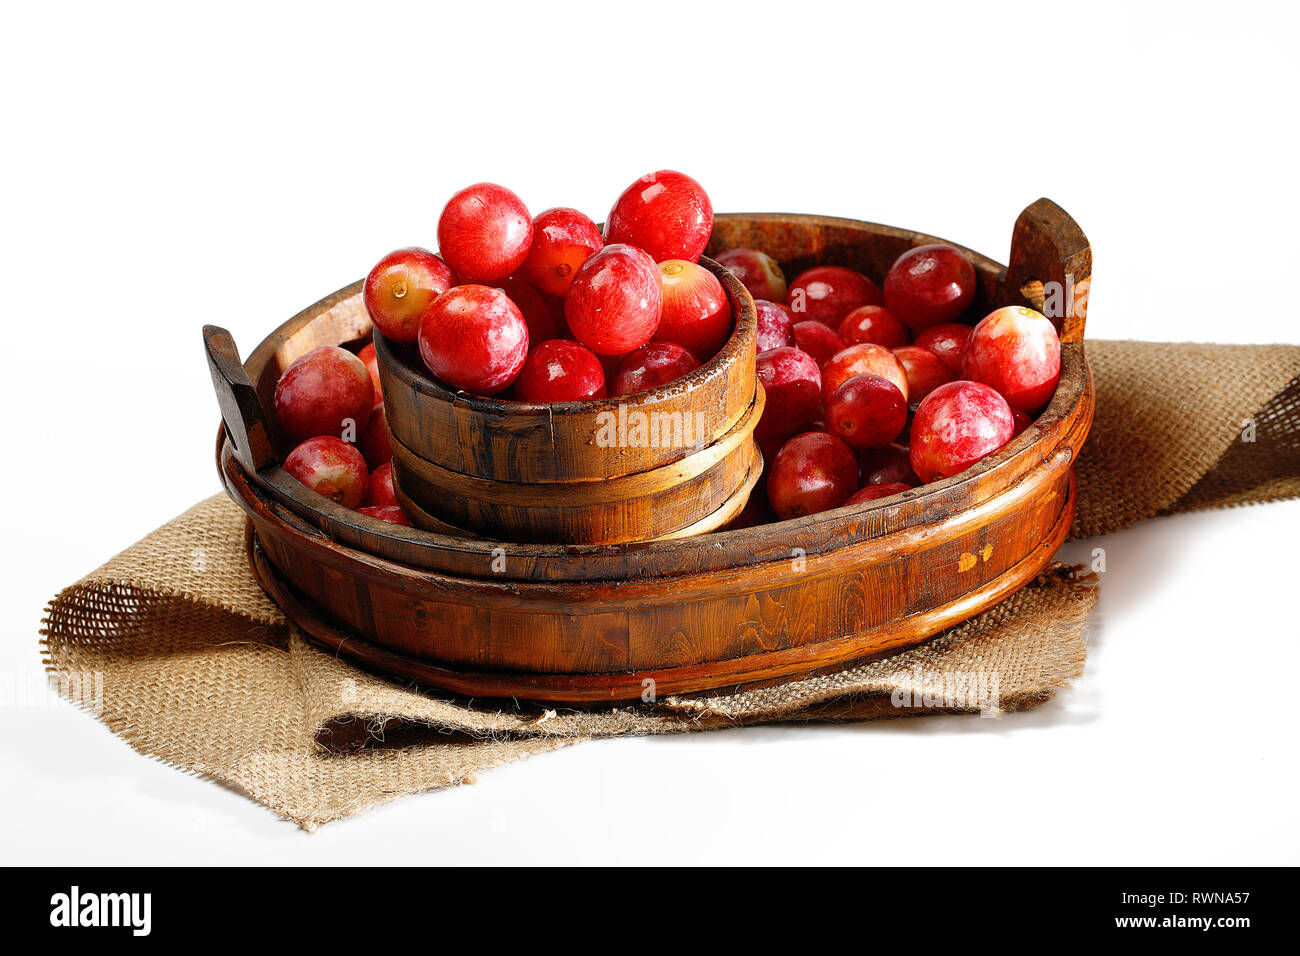 Red Mirabelle plum in basket on white background. Known as mirabelle prune or cherry plum, is a cultivar group of plum trees of the genus Prunus. Stock Photo